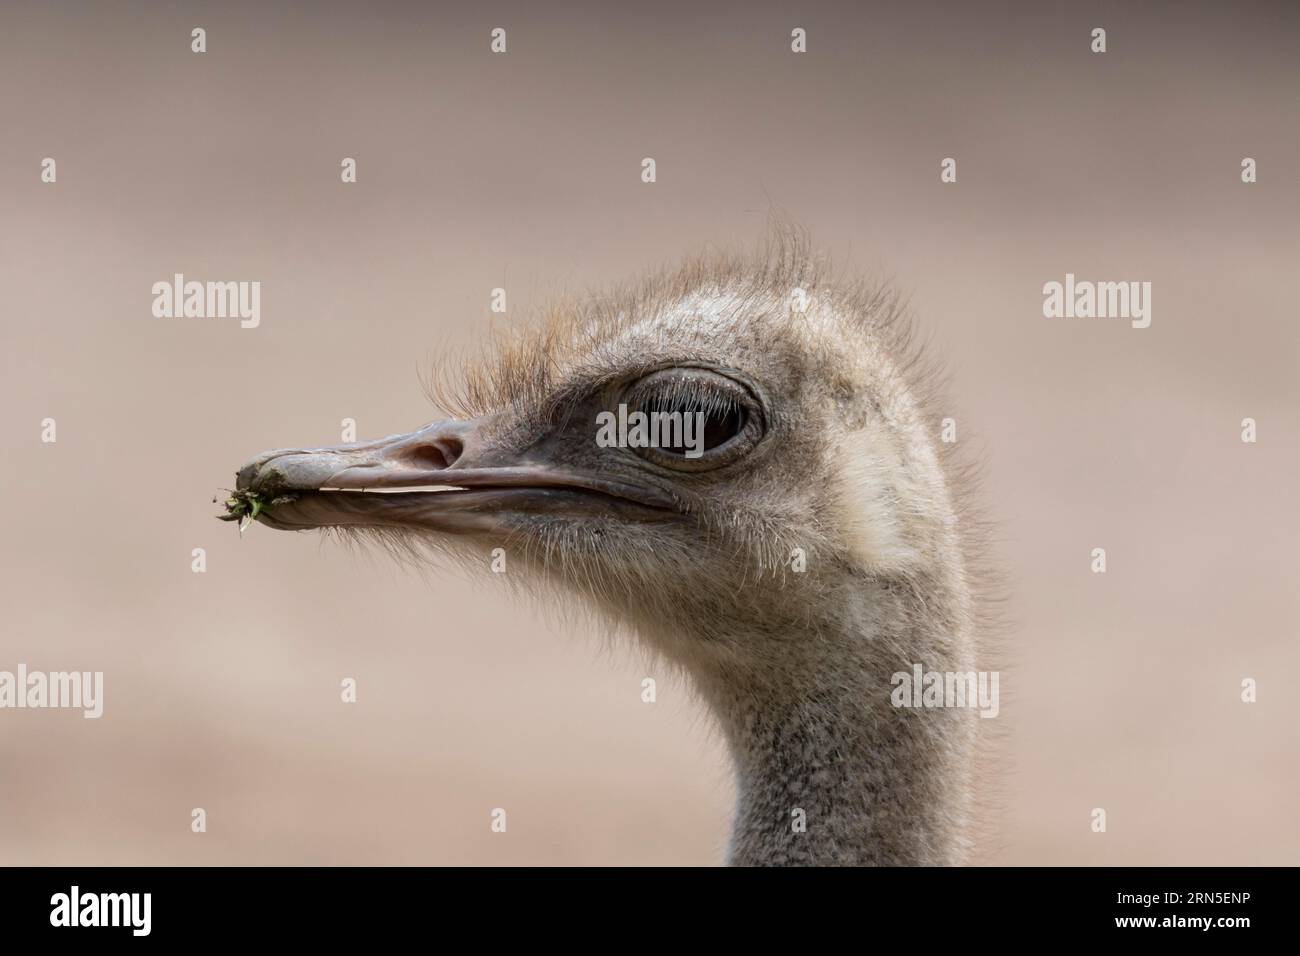 South African ostrich (Struthio camelus australis), animal portrait, captive, Germany Stock Photo